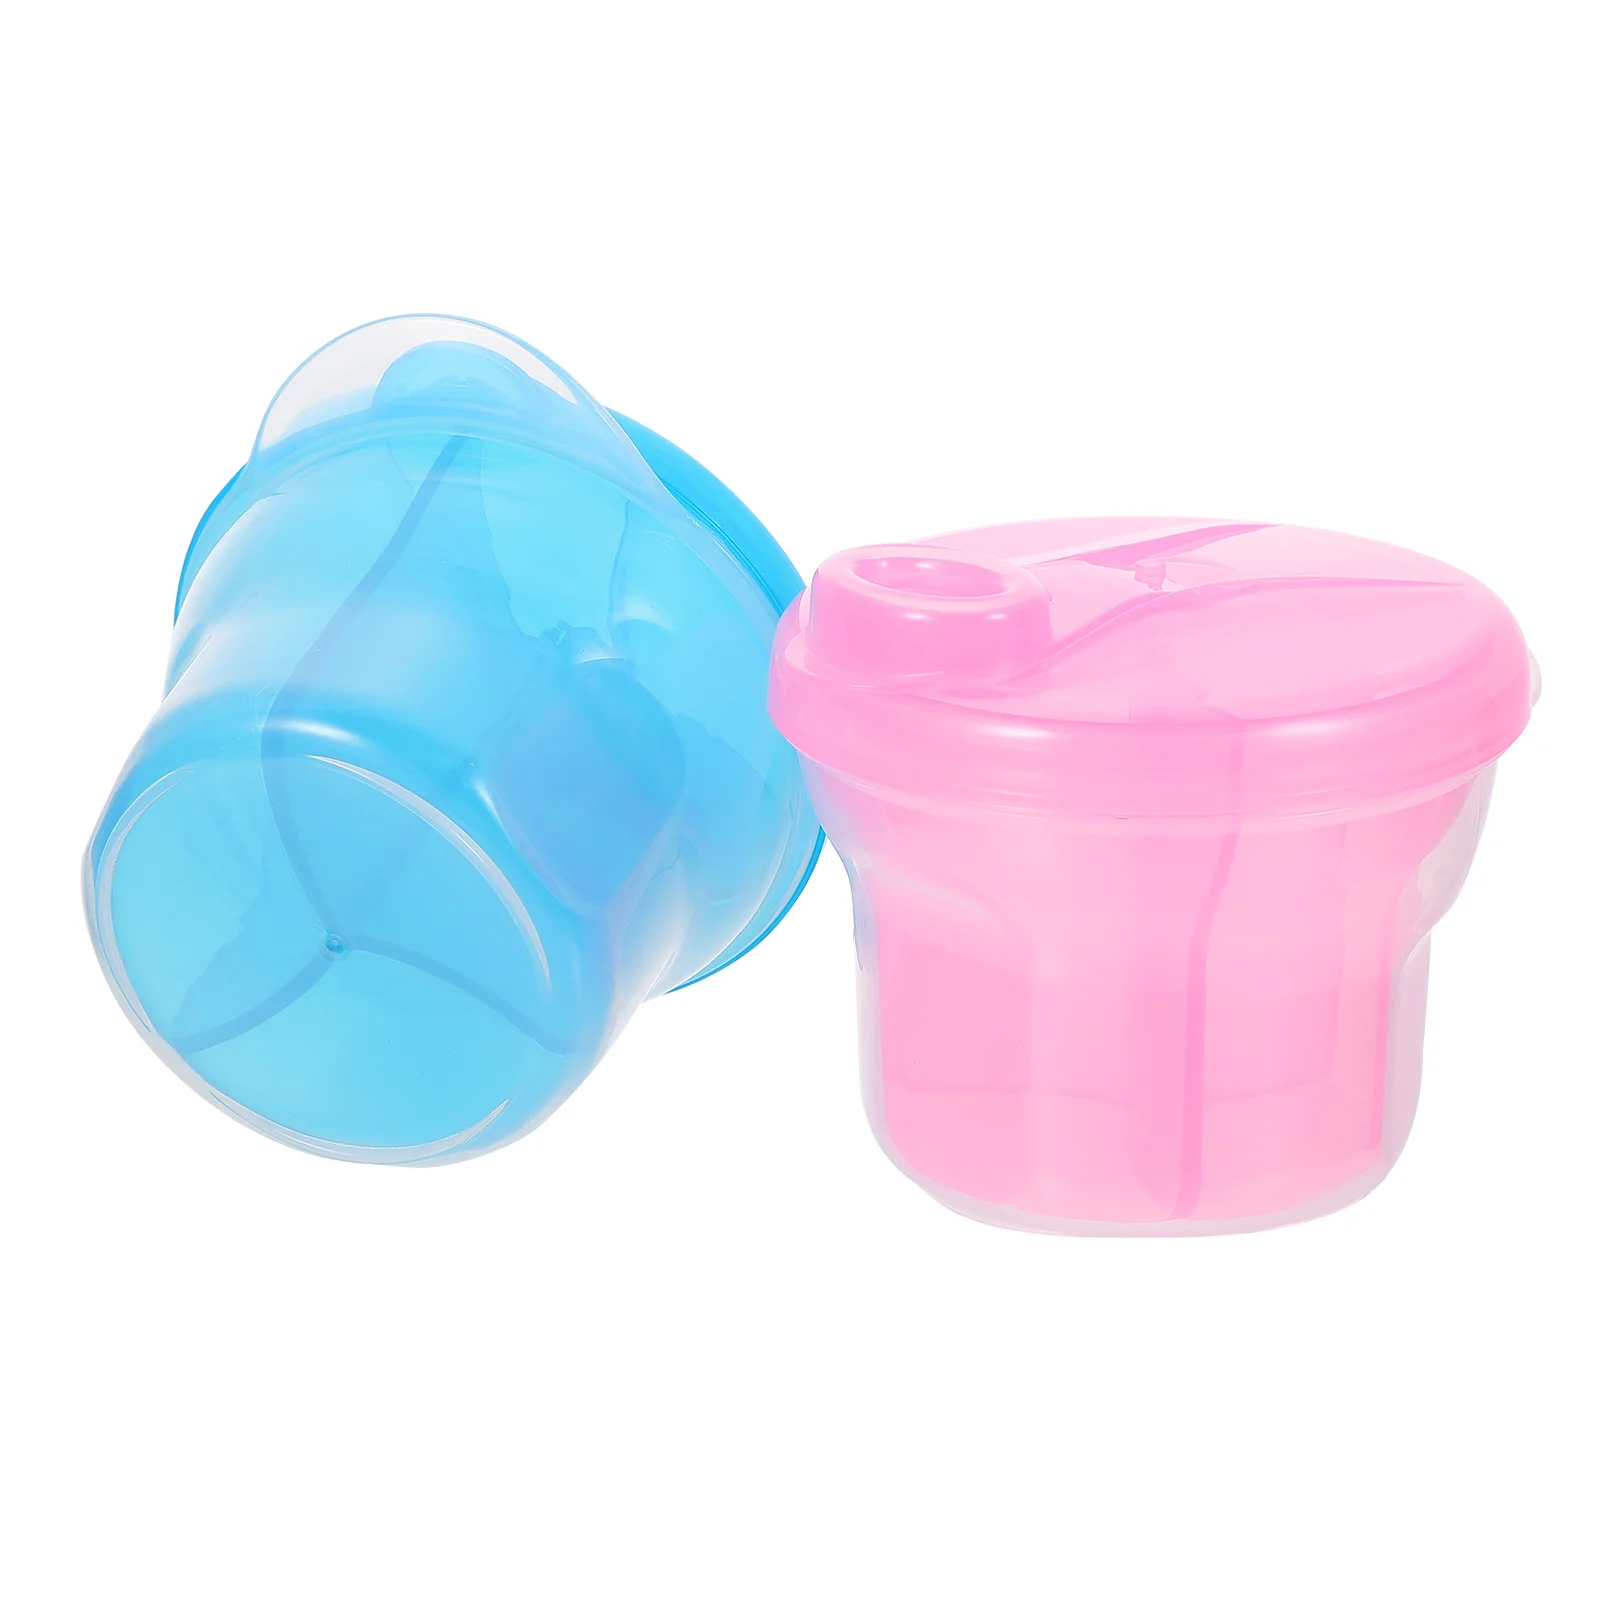 

2 Pcs Formula Dispenser Rotary Milk Powder Box Container Holder Pearlescent Portable Baby Travel Food